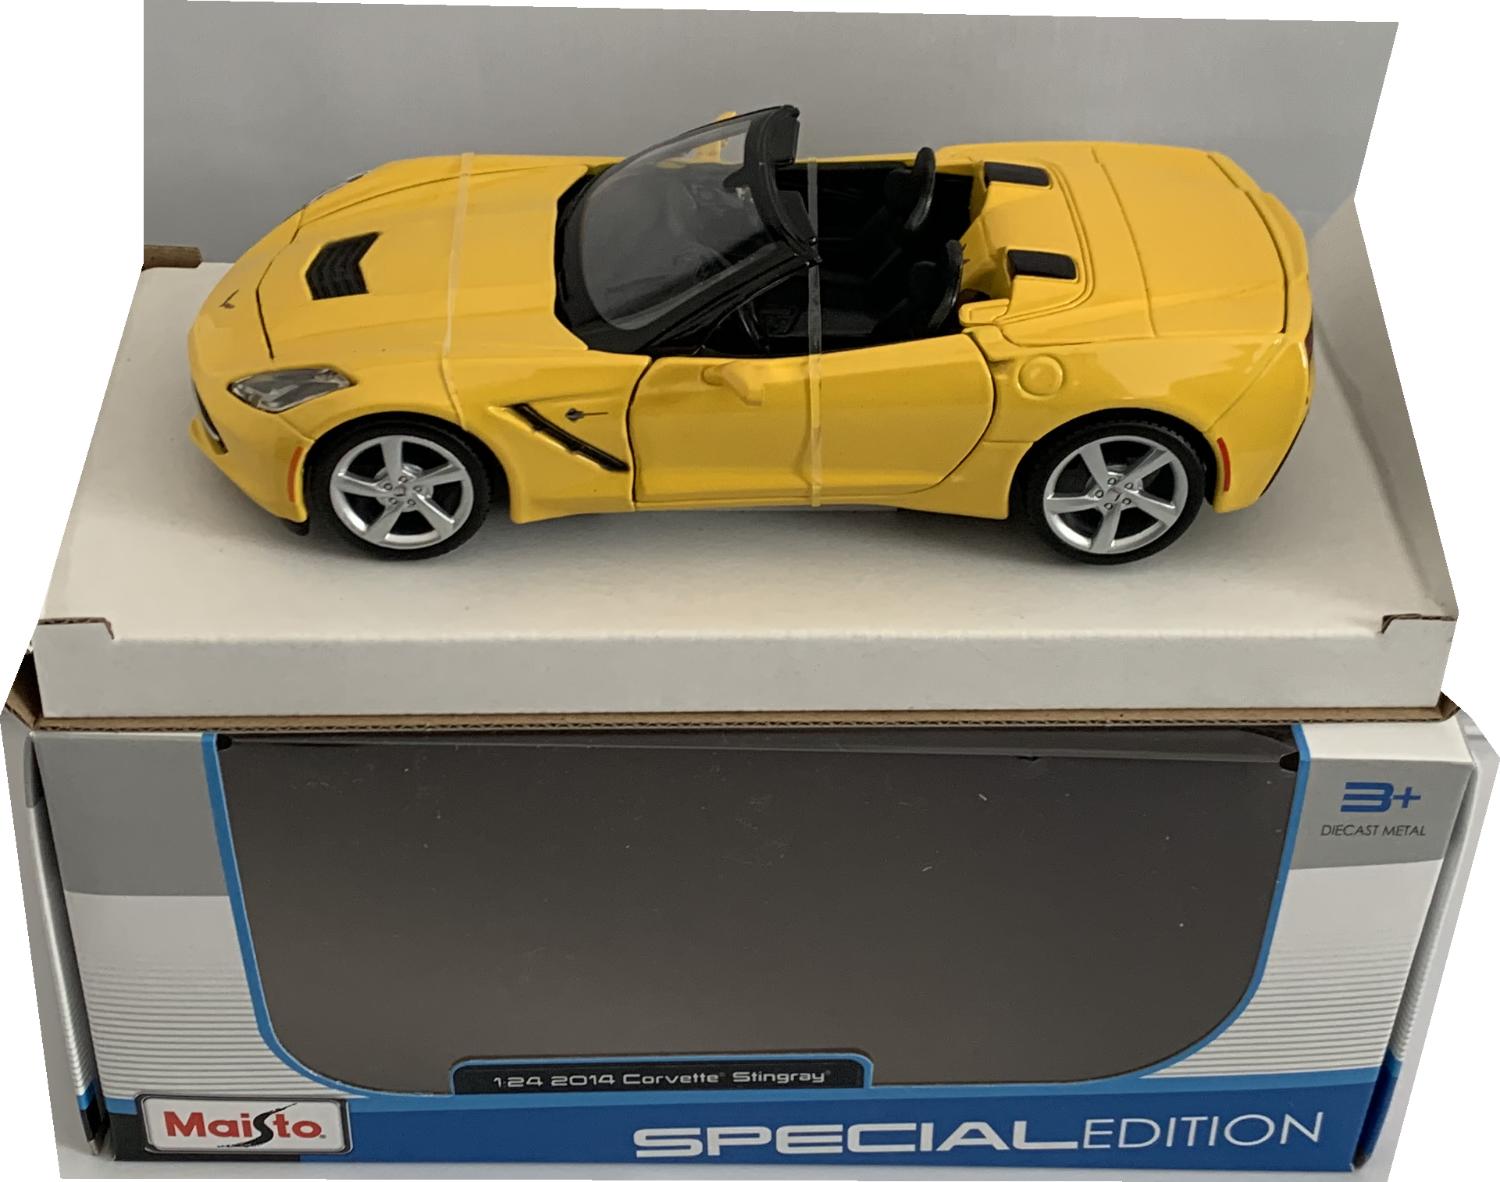 A good reproduction of the Chevrolet Corvette Stingray Coupe with detail throughout, all authentically recreated. The model is presented in a window display box, the car is approx. 18.5 cm long and the presentation box is 23 cm long ,MAI31501Yz